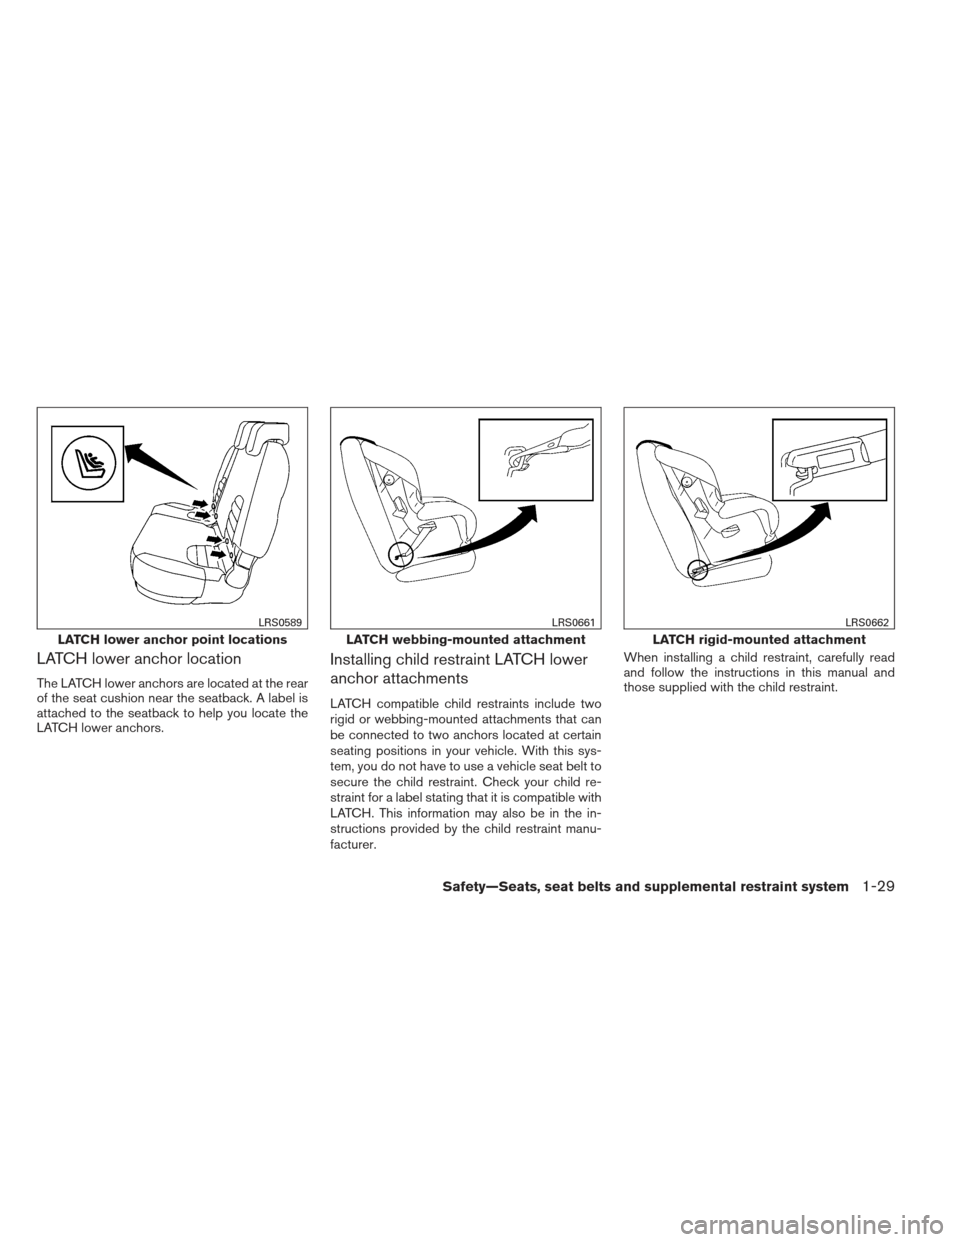 NISSAN XTERRA 2012 N50 / 2.G Service Manual LATCH lower anchor location
The LATCH lower anchors are located at the rear
of the seat cushion near the seatback. A label is
attached to the seatback to help you locate the
LATCH lower anchors.
Insta